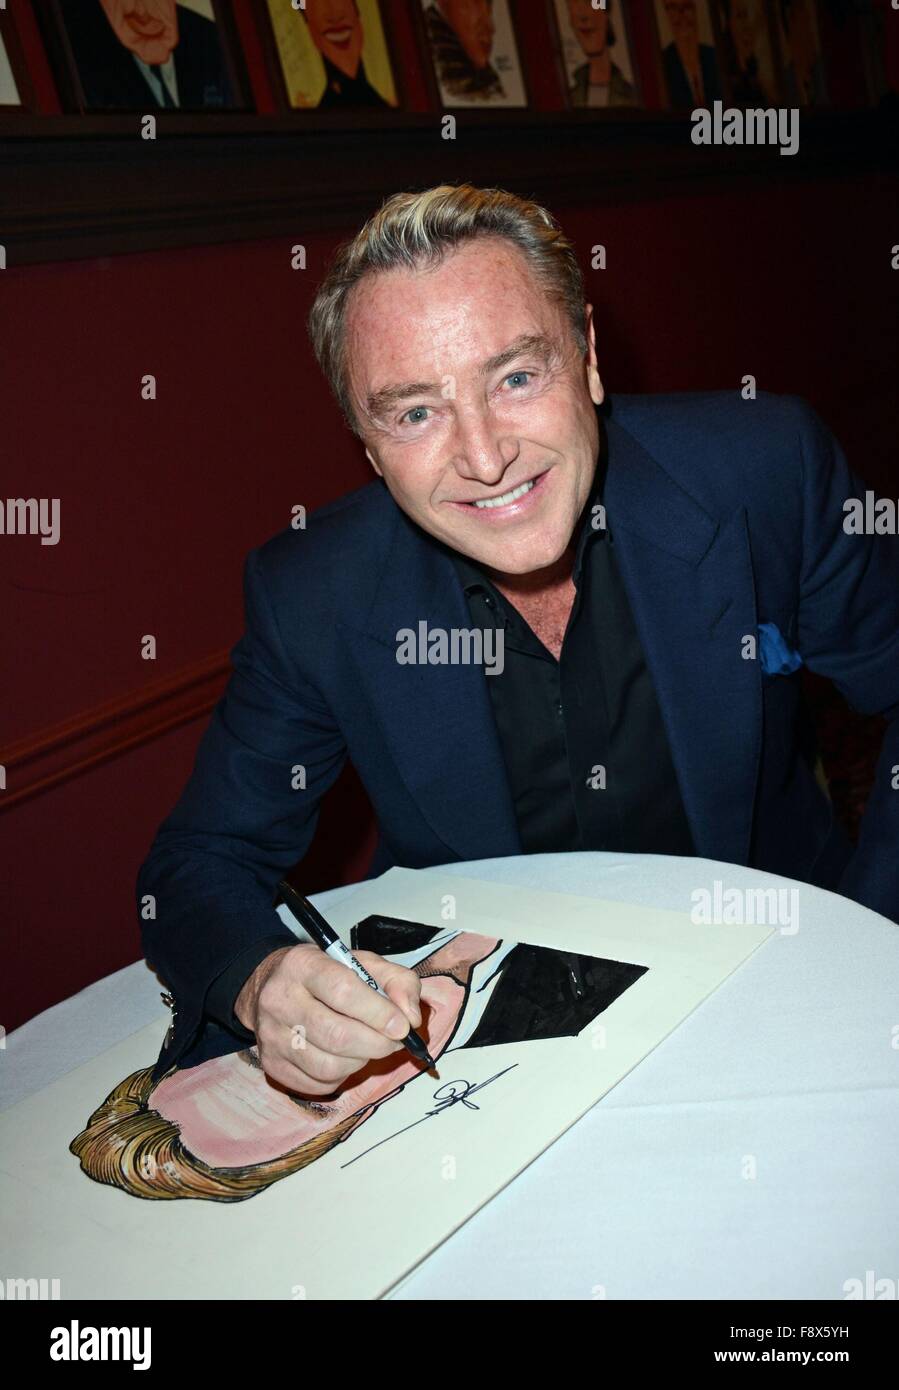 New York, NY, USA. 11th Dec, 2015. Michael Flatley at a public appearance for Lord of the Dance Michael Flatley Gets Caricature Portrait at Sardi's, Sardi's Restaurant, New York, NY December 11, 2015. Credit:  Derek Storm/Everett Collection/Alamy Live News Stock Photo